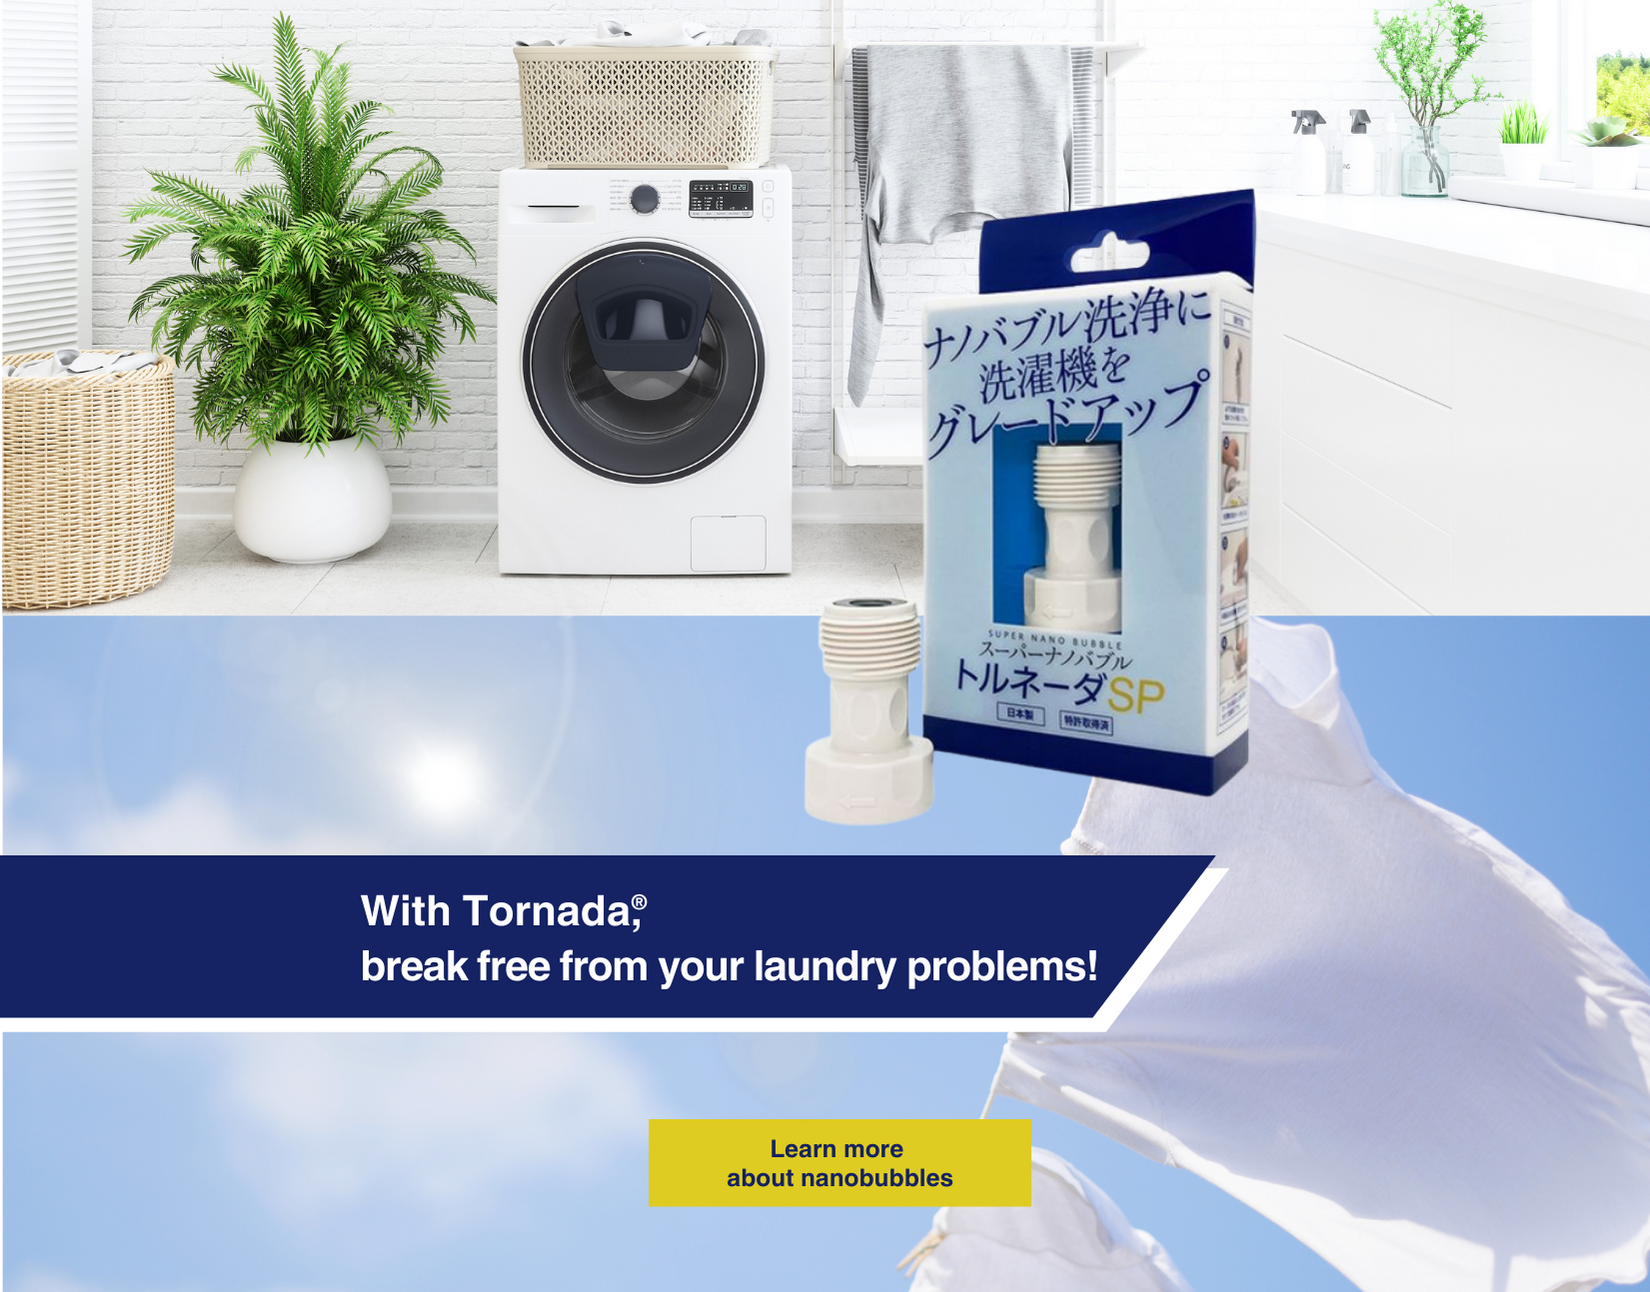 Solve your laundry problems with Tornada.